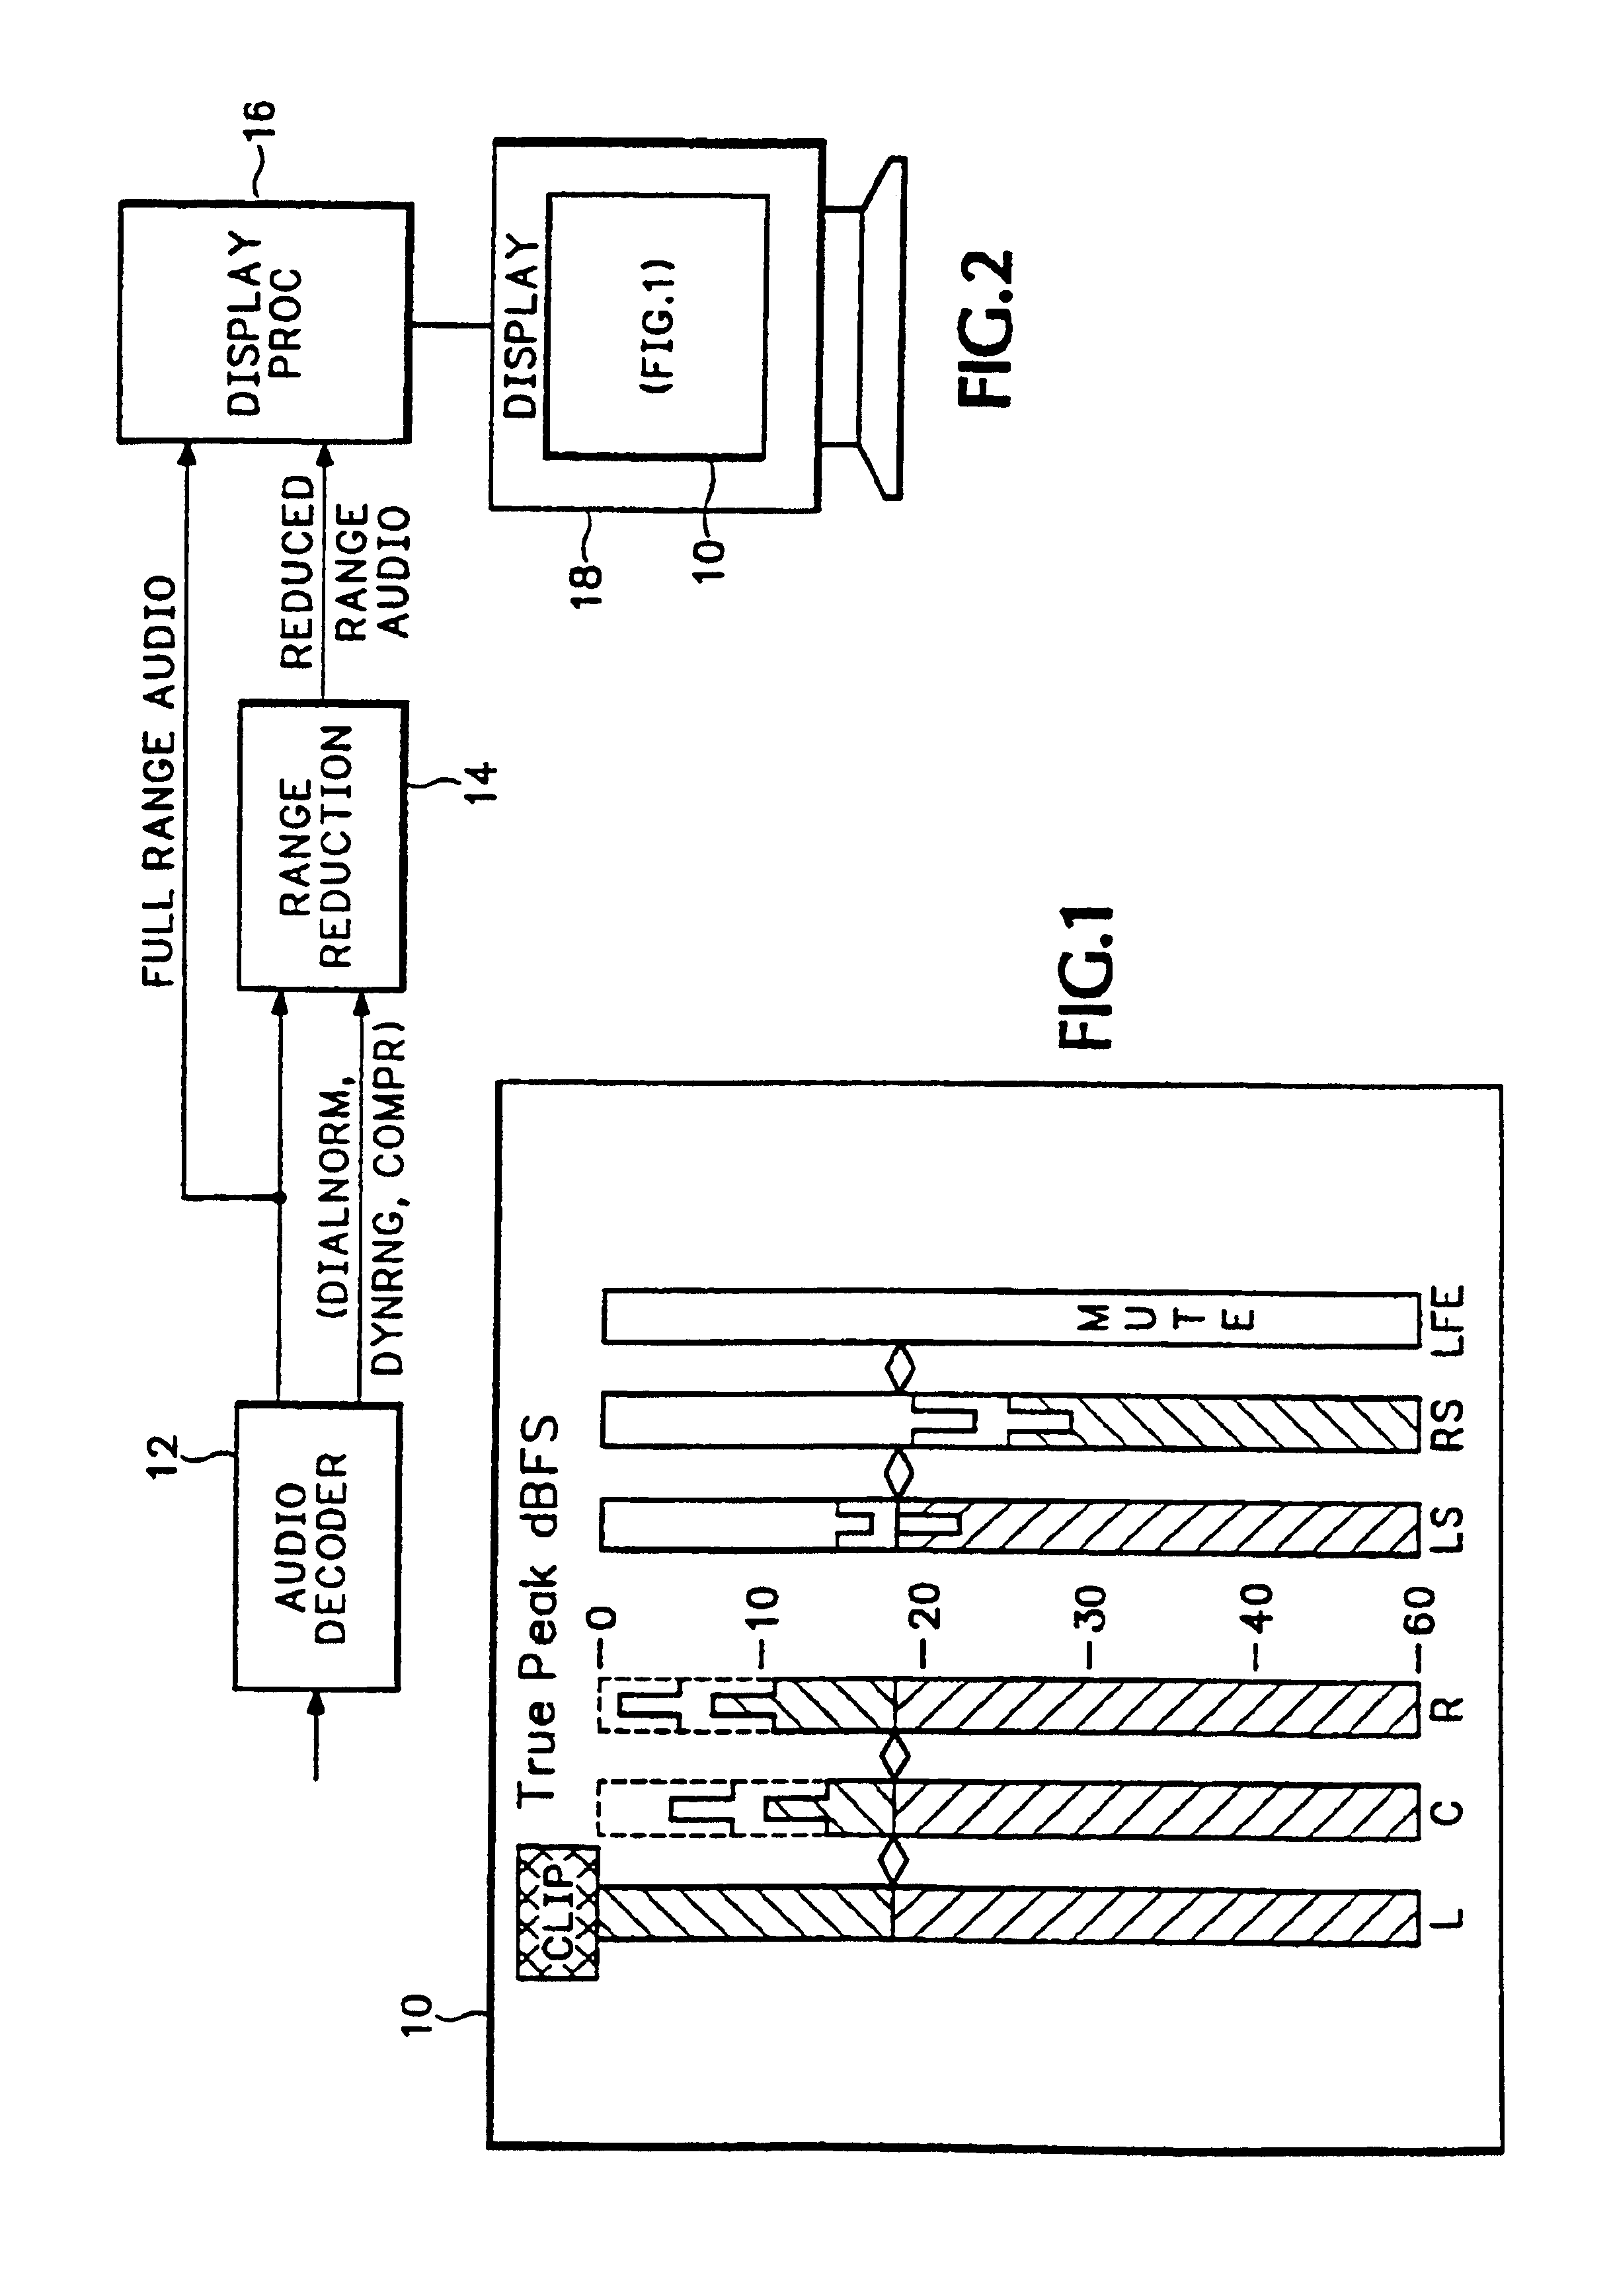 Dual-bar audio level meter for digital audio with dynamic range control